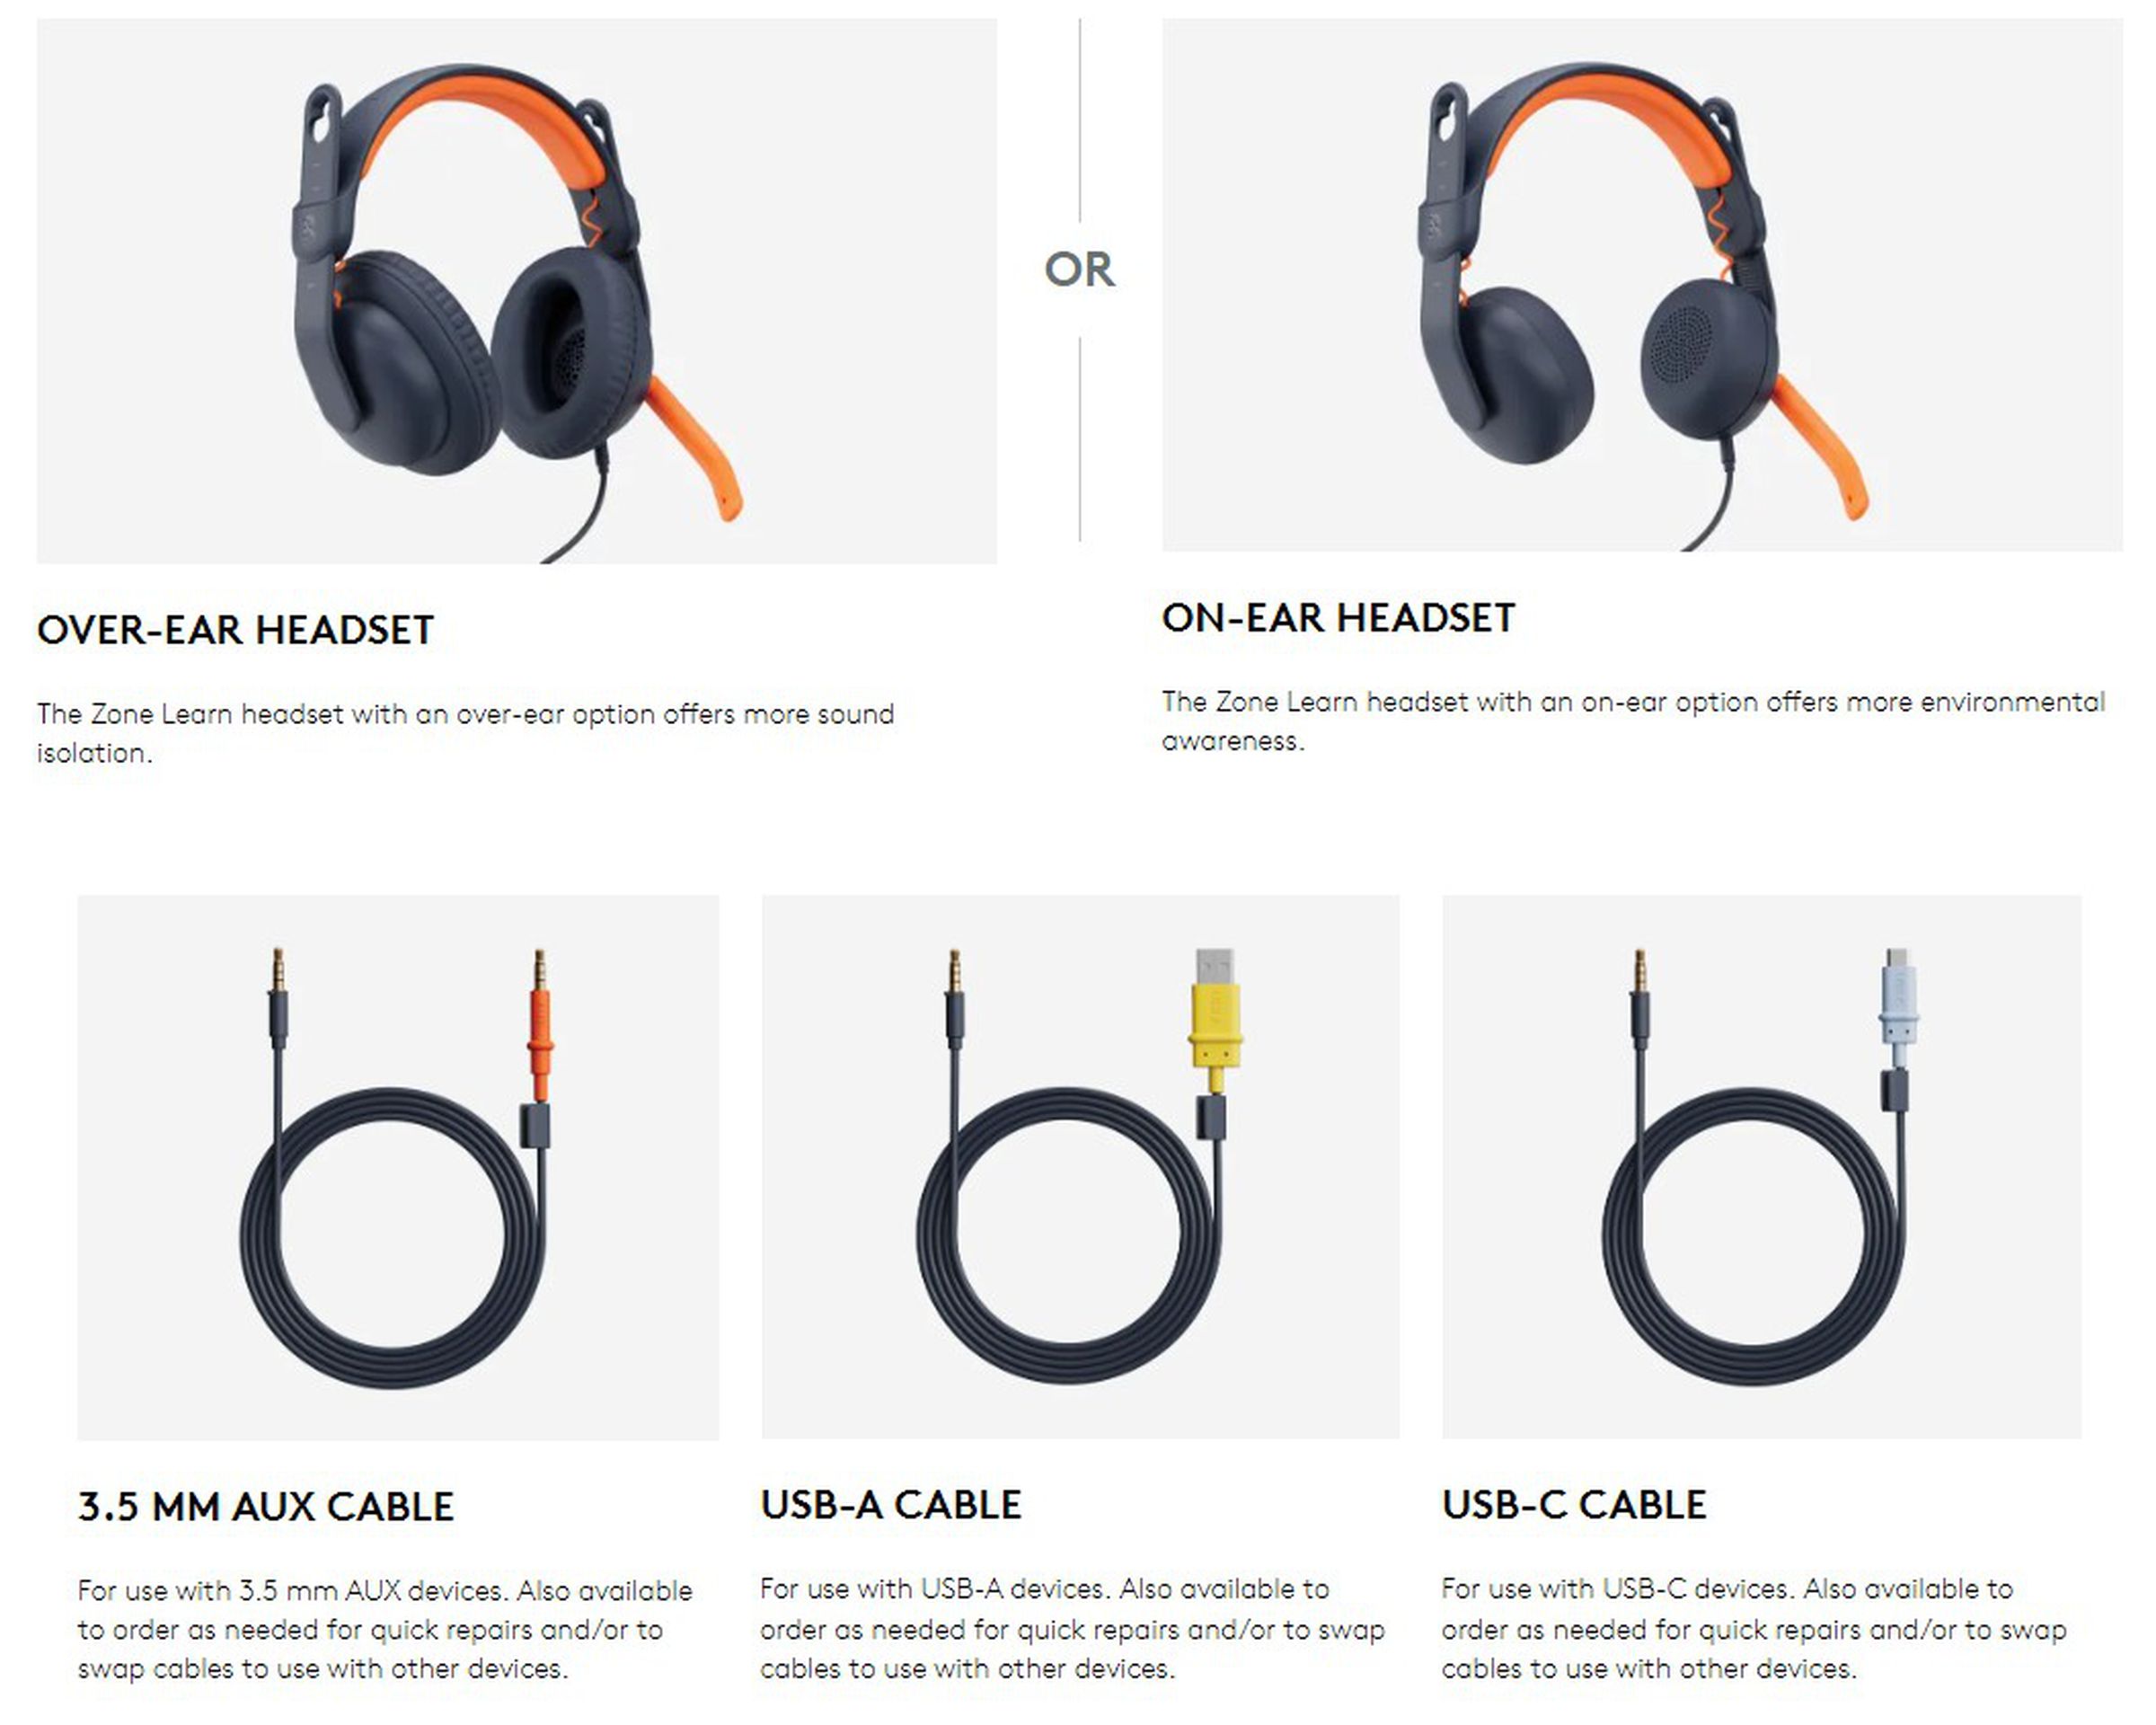 Over-ear, on-ear, and three different modular cables are available to educators.